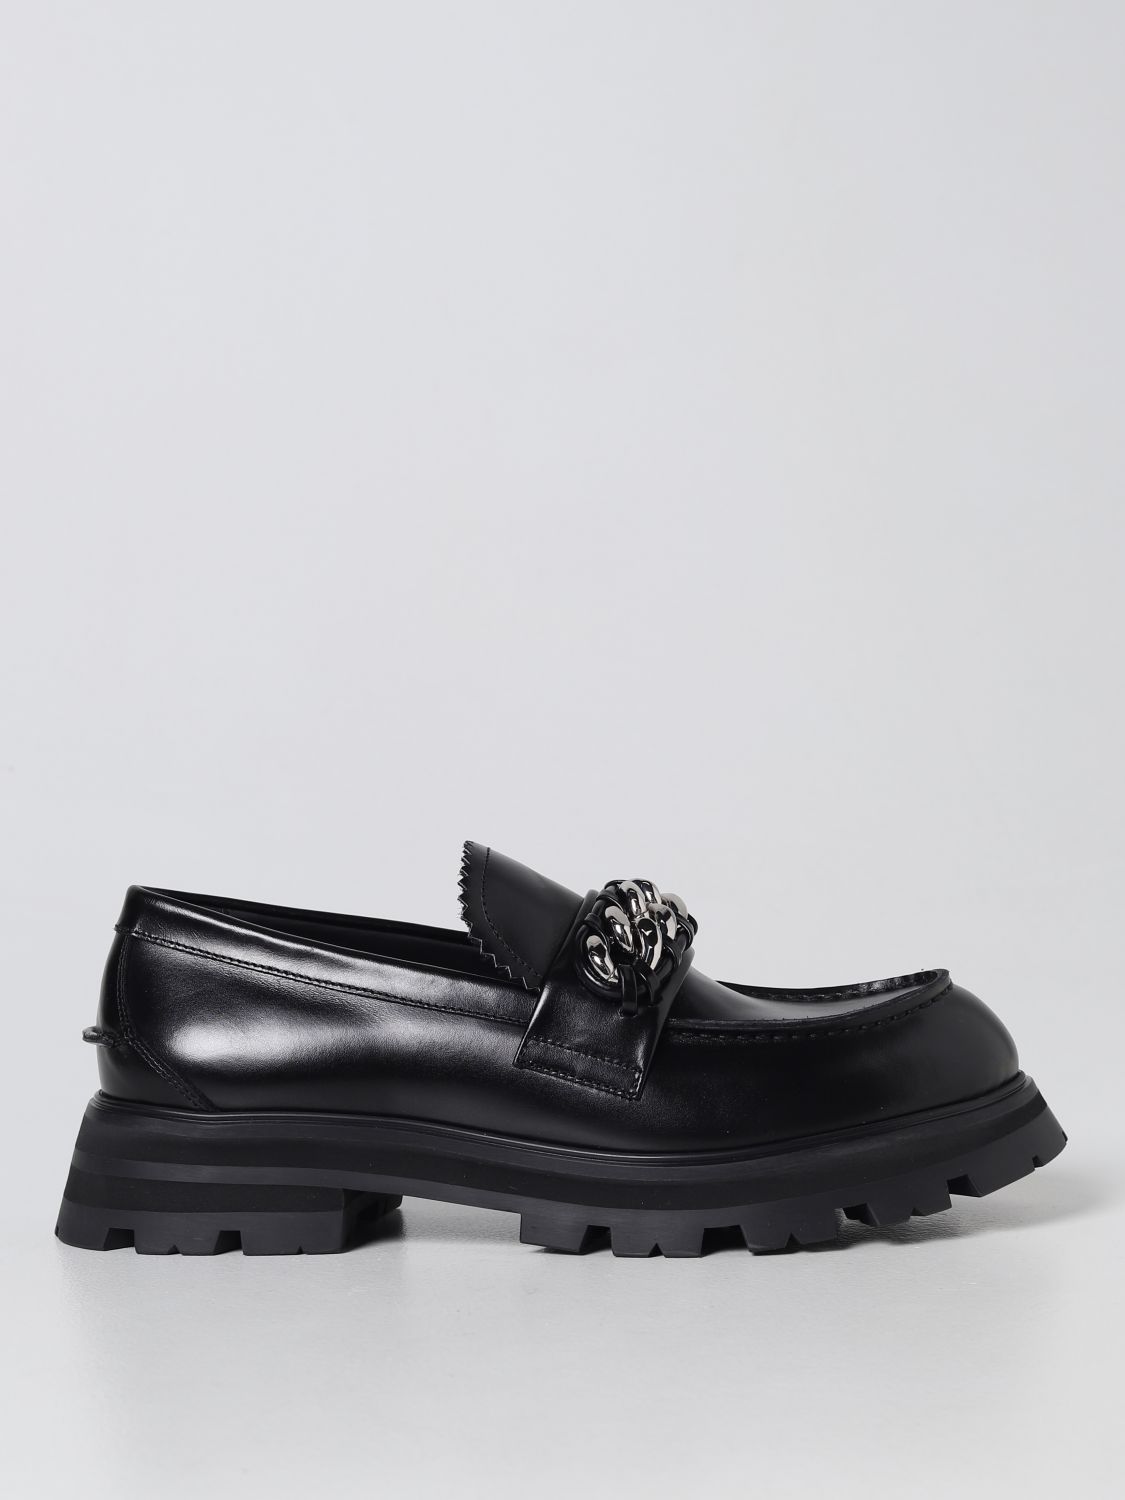 Alexander Mcqueen Leather Loafer In Black/silver | ModeSens